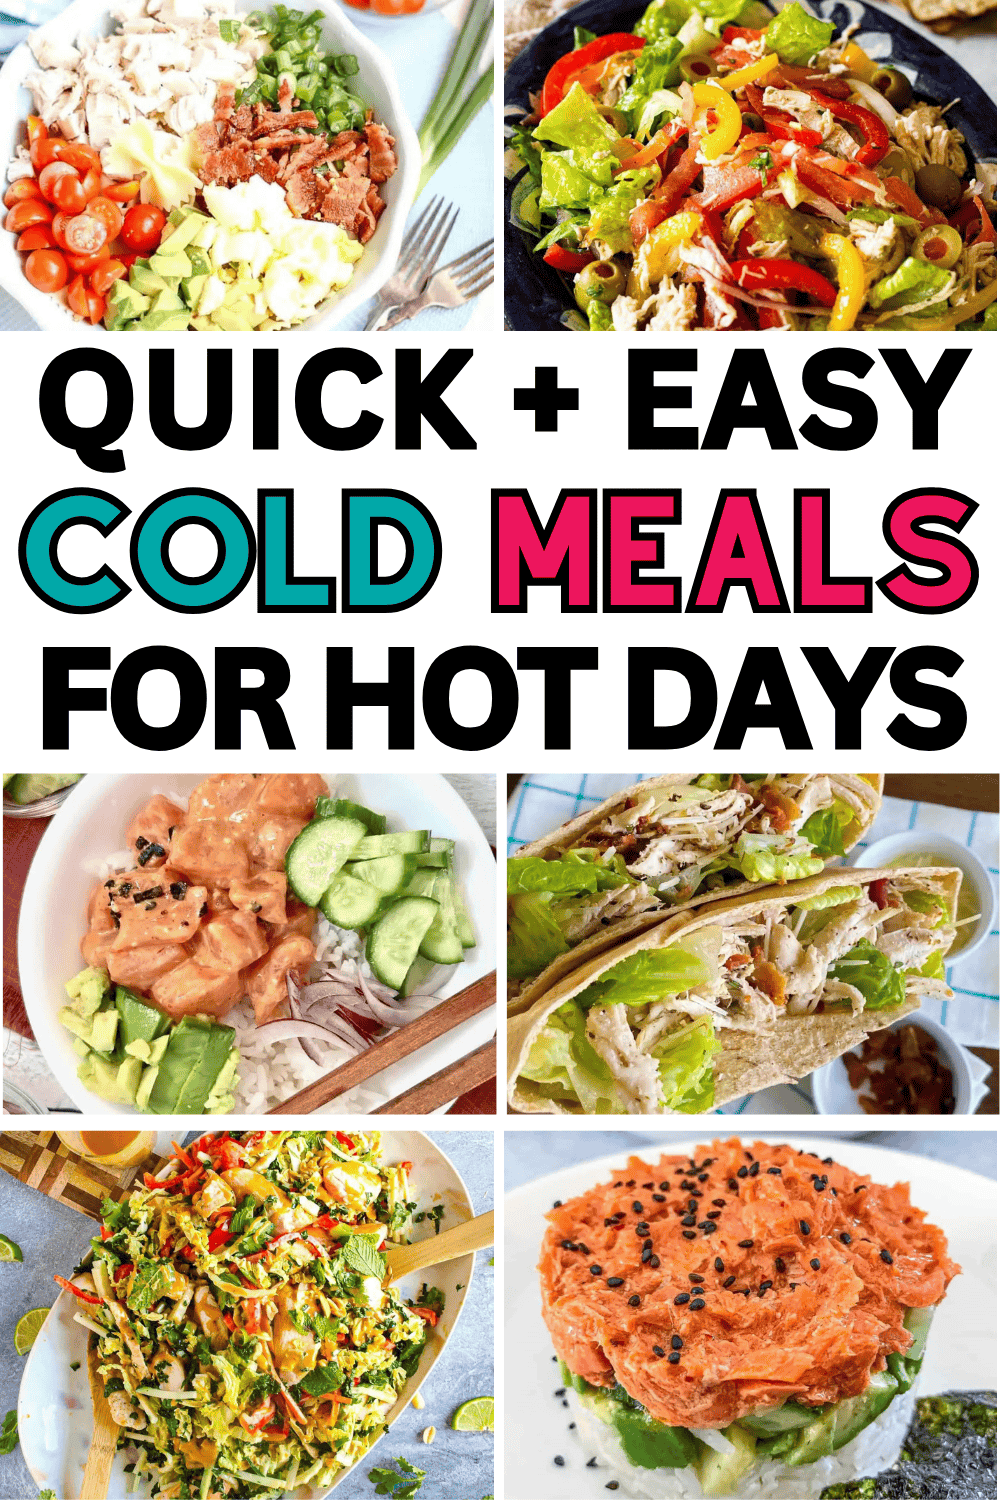 Cold dinner ideas for hot days! Healthy hot weather dinner ideas, cold meals for summer, easy recipes for hot weather, no cook dinners for summer, hot weather food, meals for hot days dinners, no cook dinner ideas summer, meals for a hot day summer dinners, easy summer dinner recipes for family with kids, no oven dinner ideas, summer dinner ideas too hot to cook, summer lunch recipes, summer salad recipes, summer picnic meals, summer food aesthetic, cheap meals for summer, lazy summer dinners.